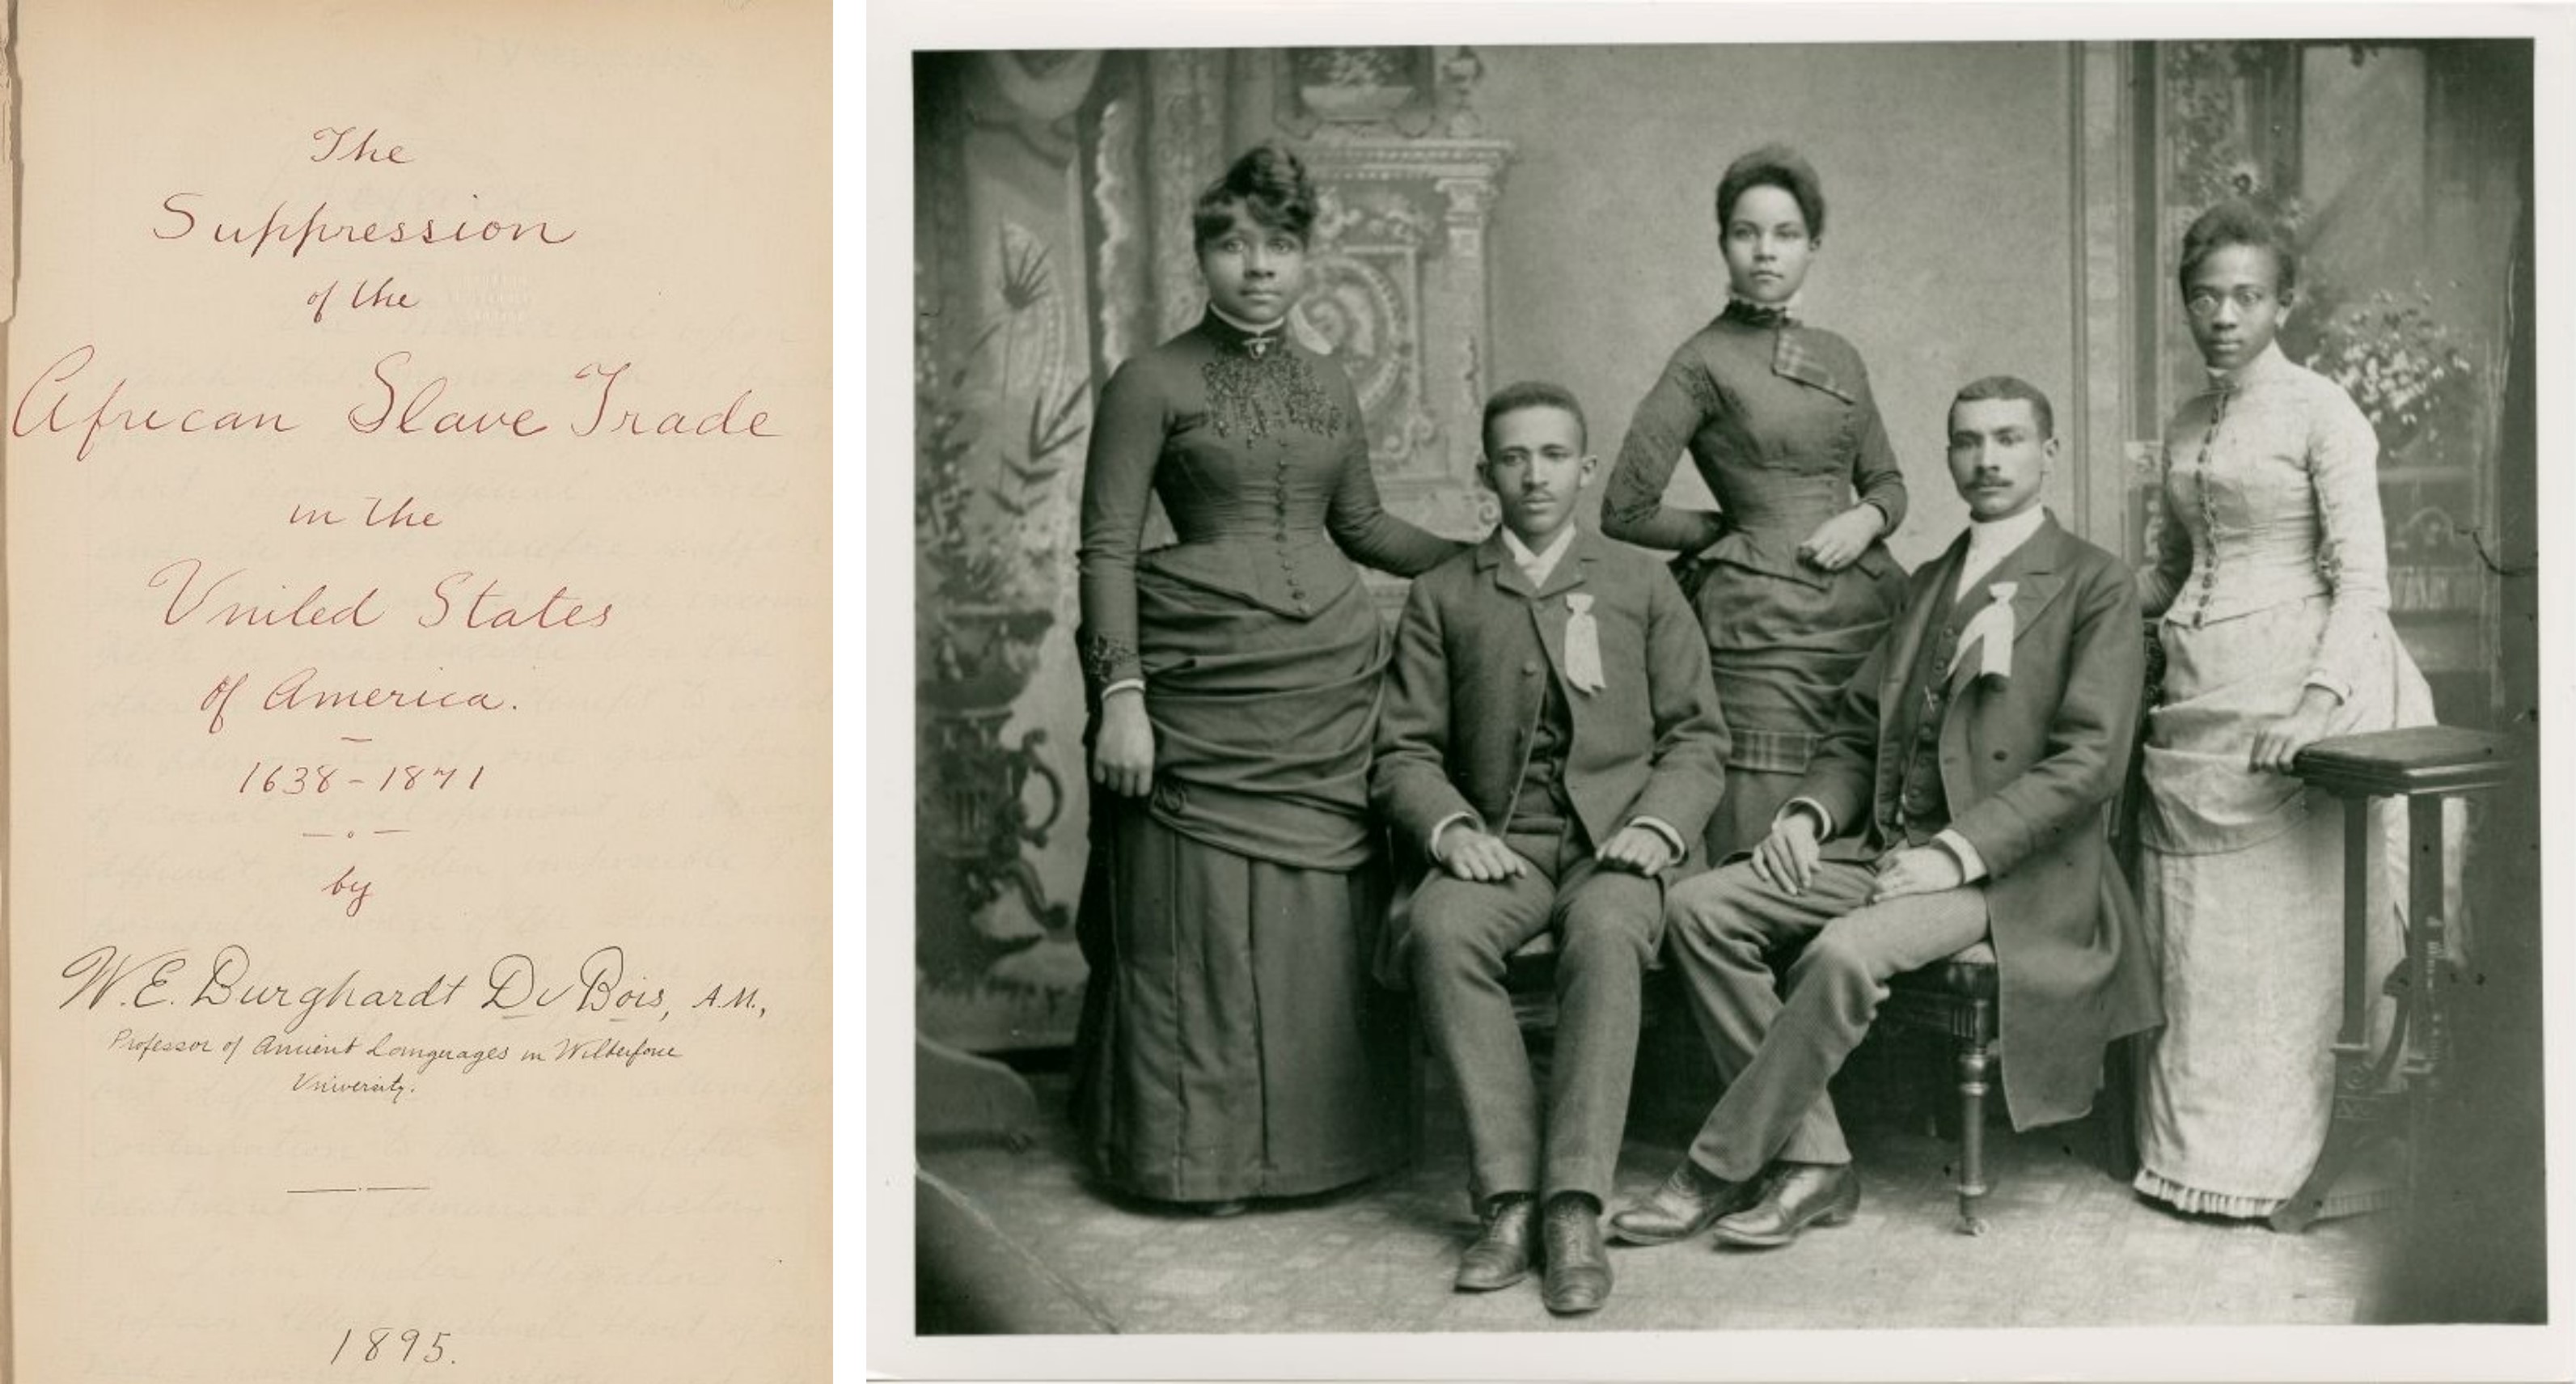 On the left, the first page of Du Bois' dissertation. On the right, a picture of Du Bois with the Frisk University class of 1888.